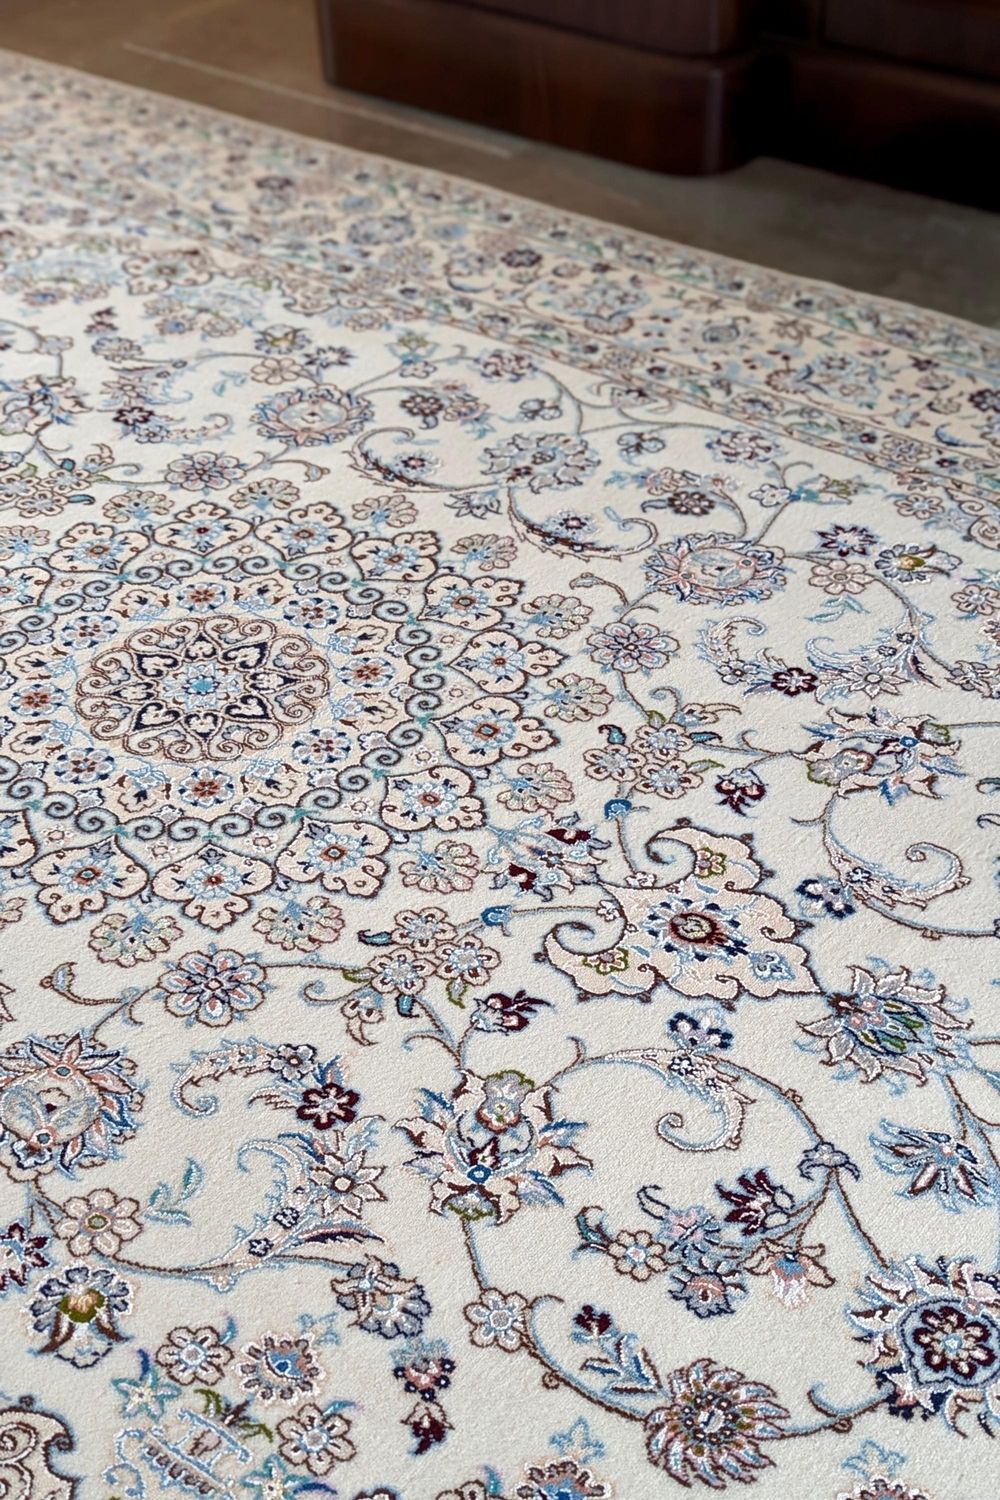 Authentic oriental rug with traditional floral design in cream, ivory and blue